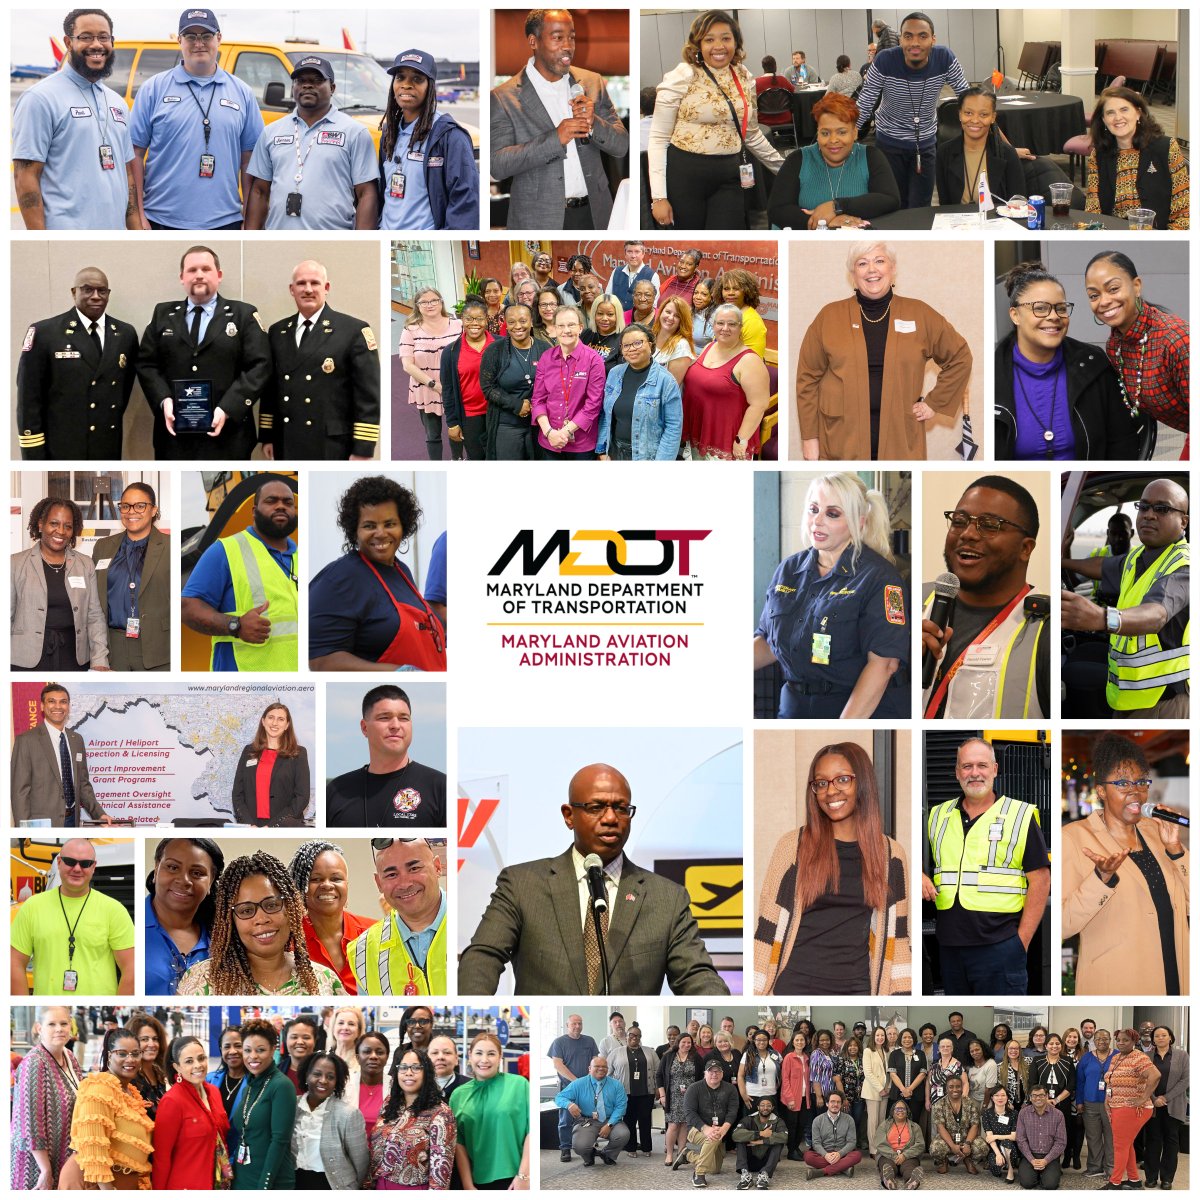 A special salute today to our Maryland Aviation Administration team!

We thank the 400+ MAA employees based here at BWI Marshall Airport for providing excellent service to passengers and partners.

#StateEmployeeRecognitionDay #StateEmployeeAppreciationDay #MDOTdelivers #airports